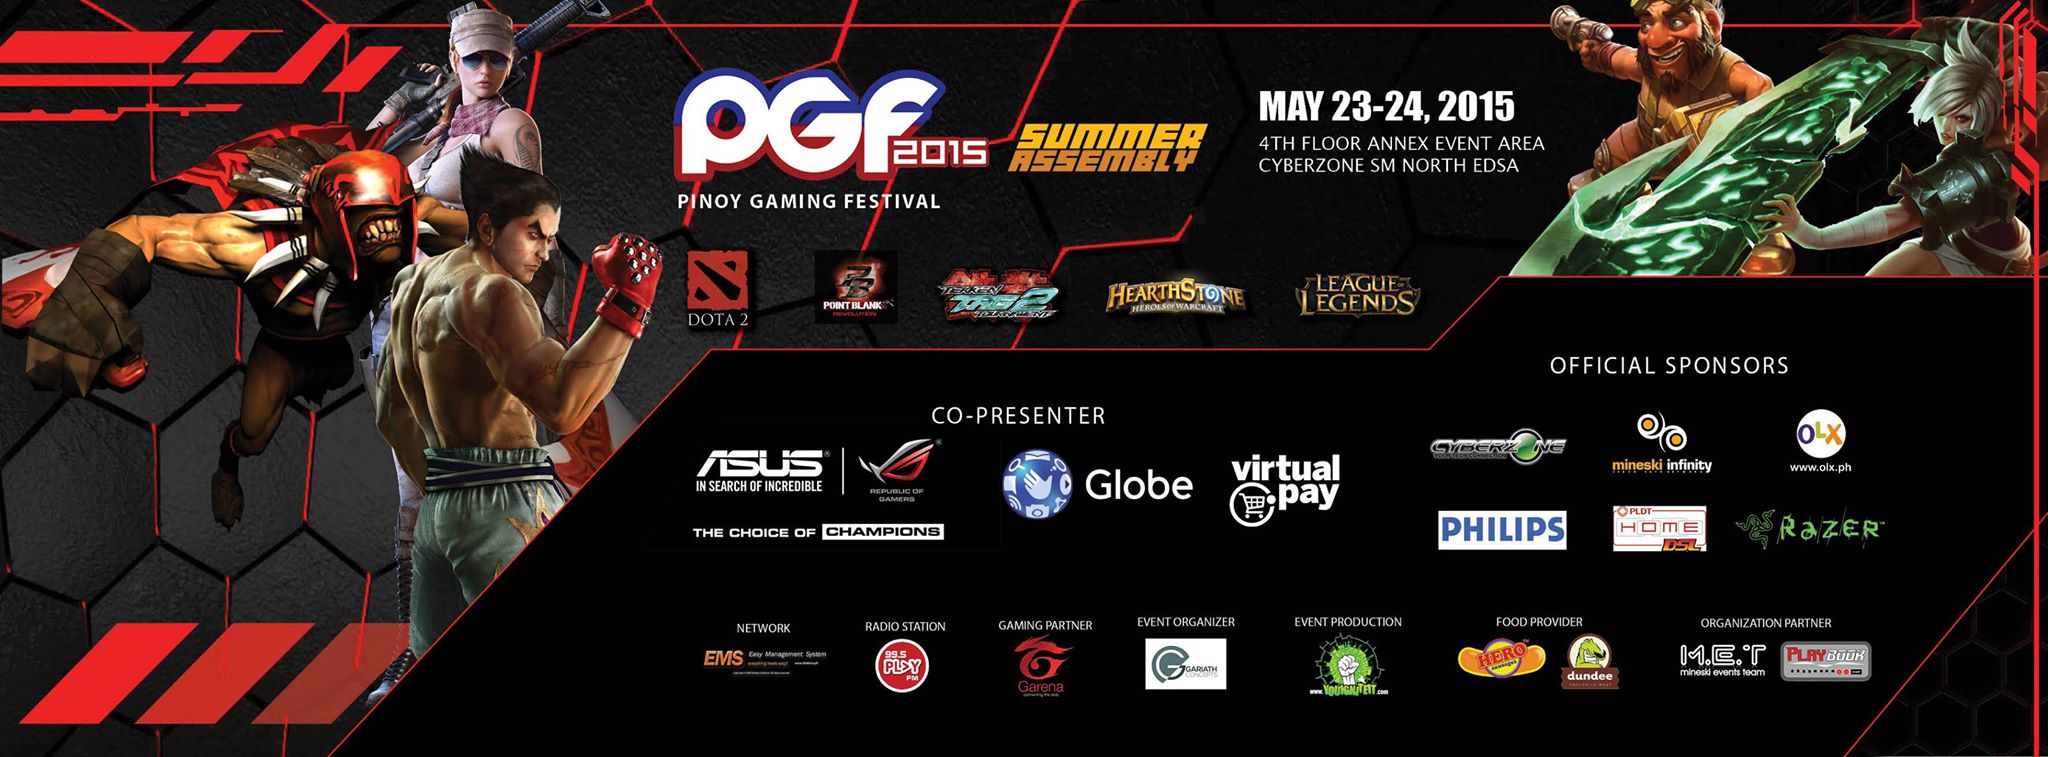 Pinoy Gaming Festival: Summer Assembly 2015 18